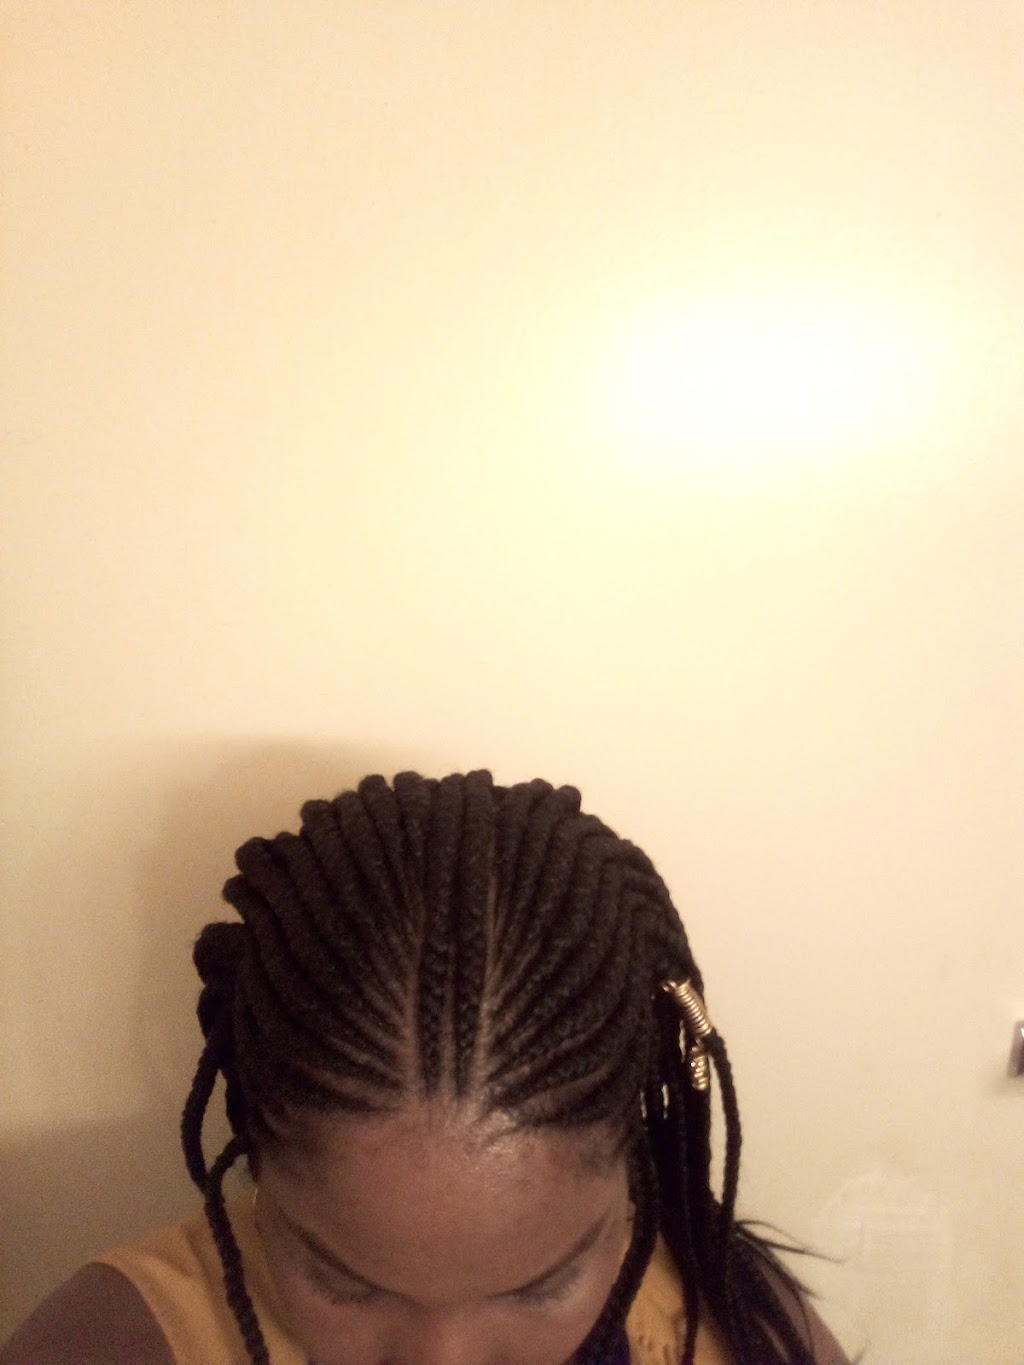 Sow African Hair Braiding | 615 W Marshall St, Norristown, PA 19401 | Phone: (610) 292-0329